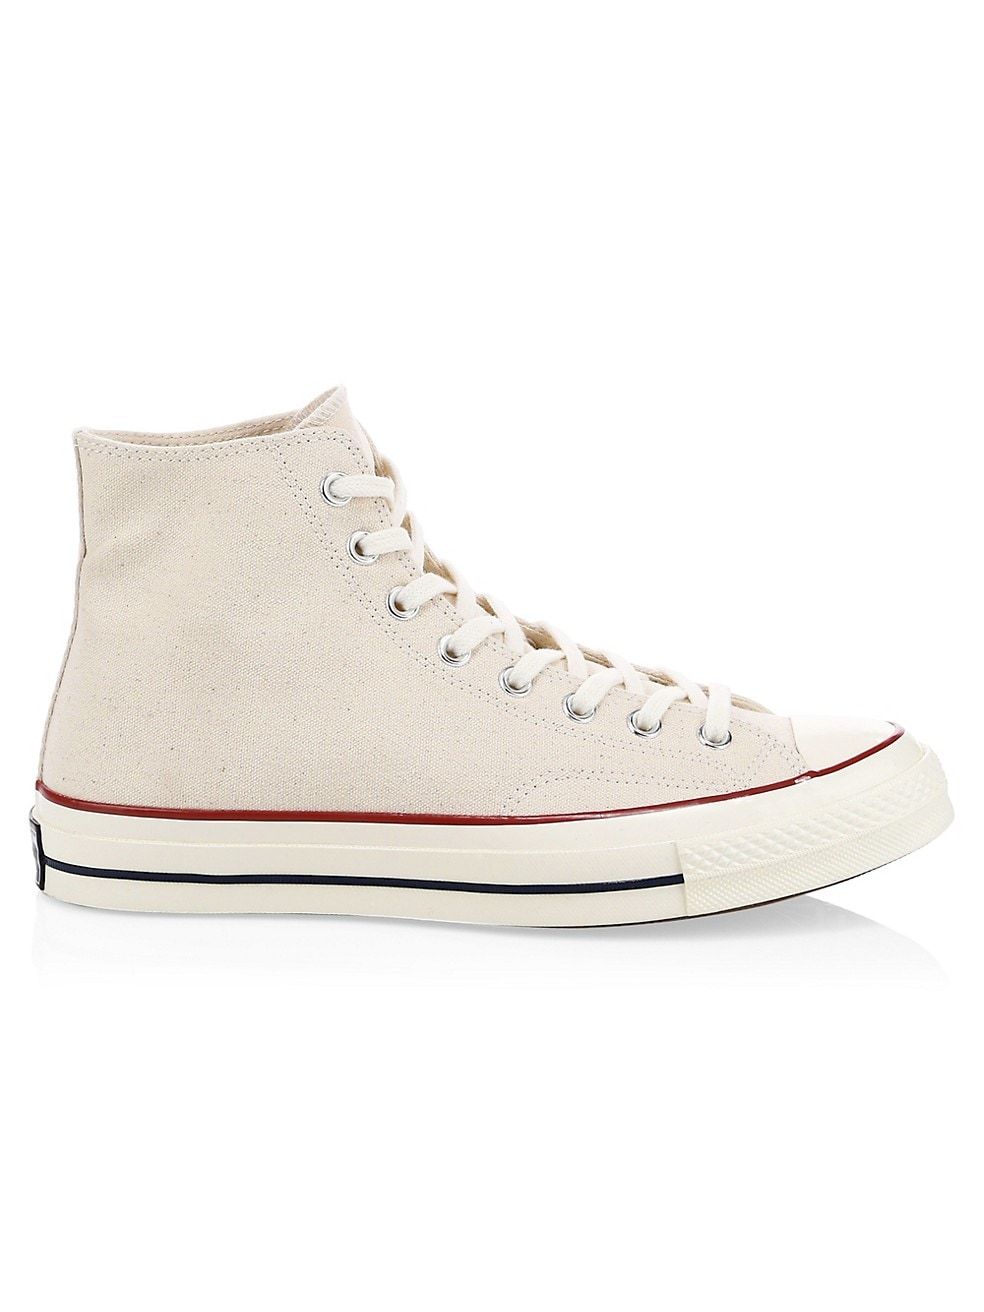 Vintage Canvas Chuck 70 High-Top Sneakers | Saks Fifth Avenue